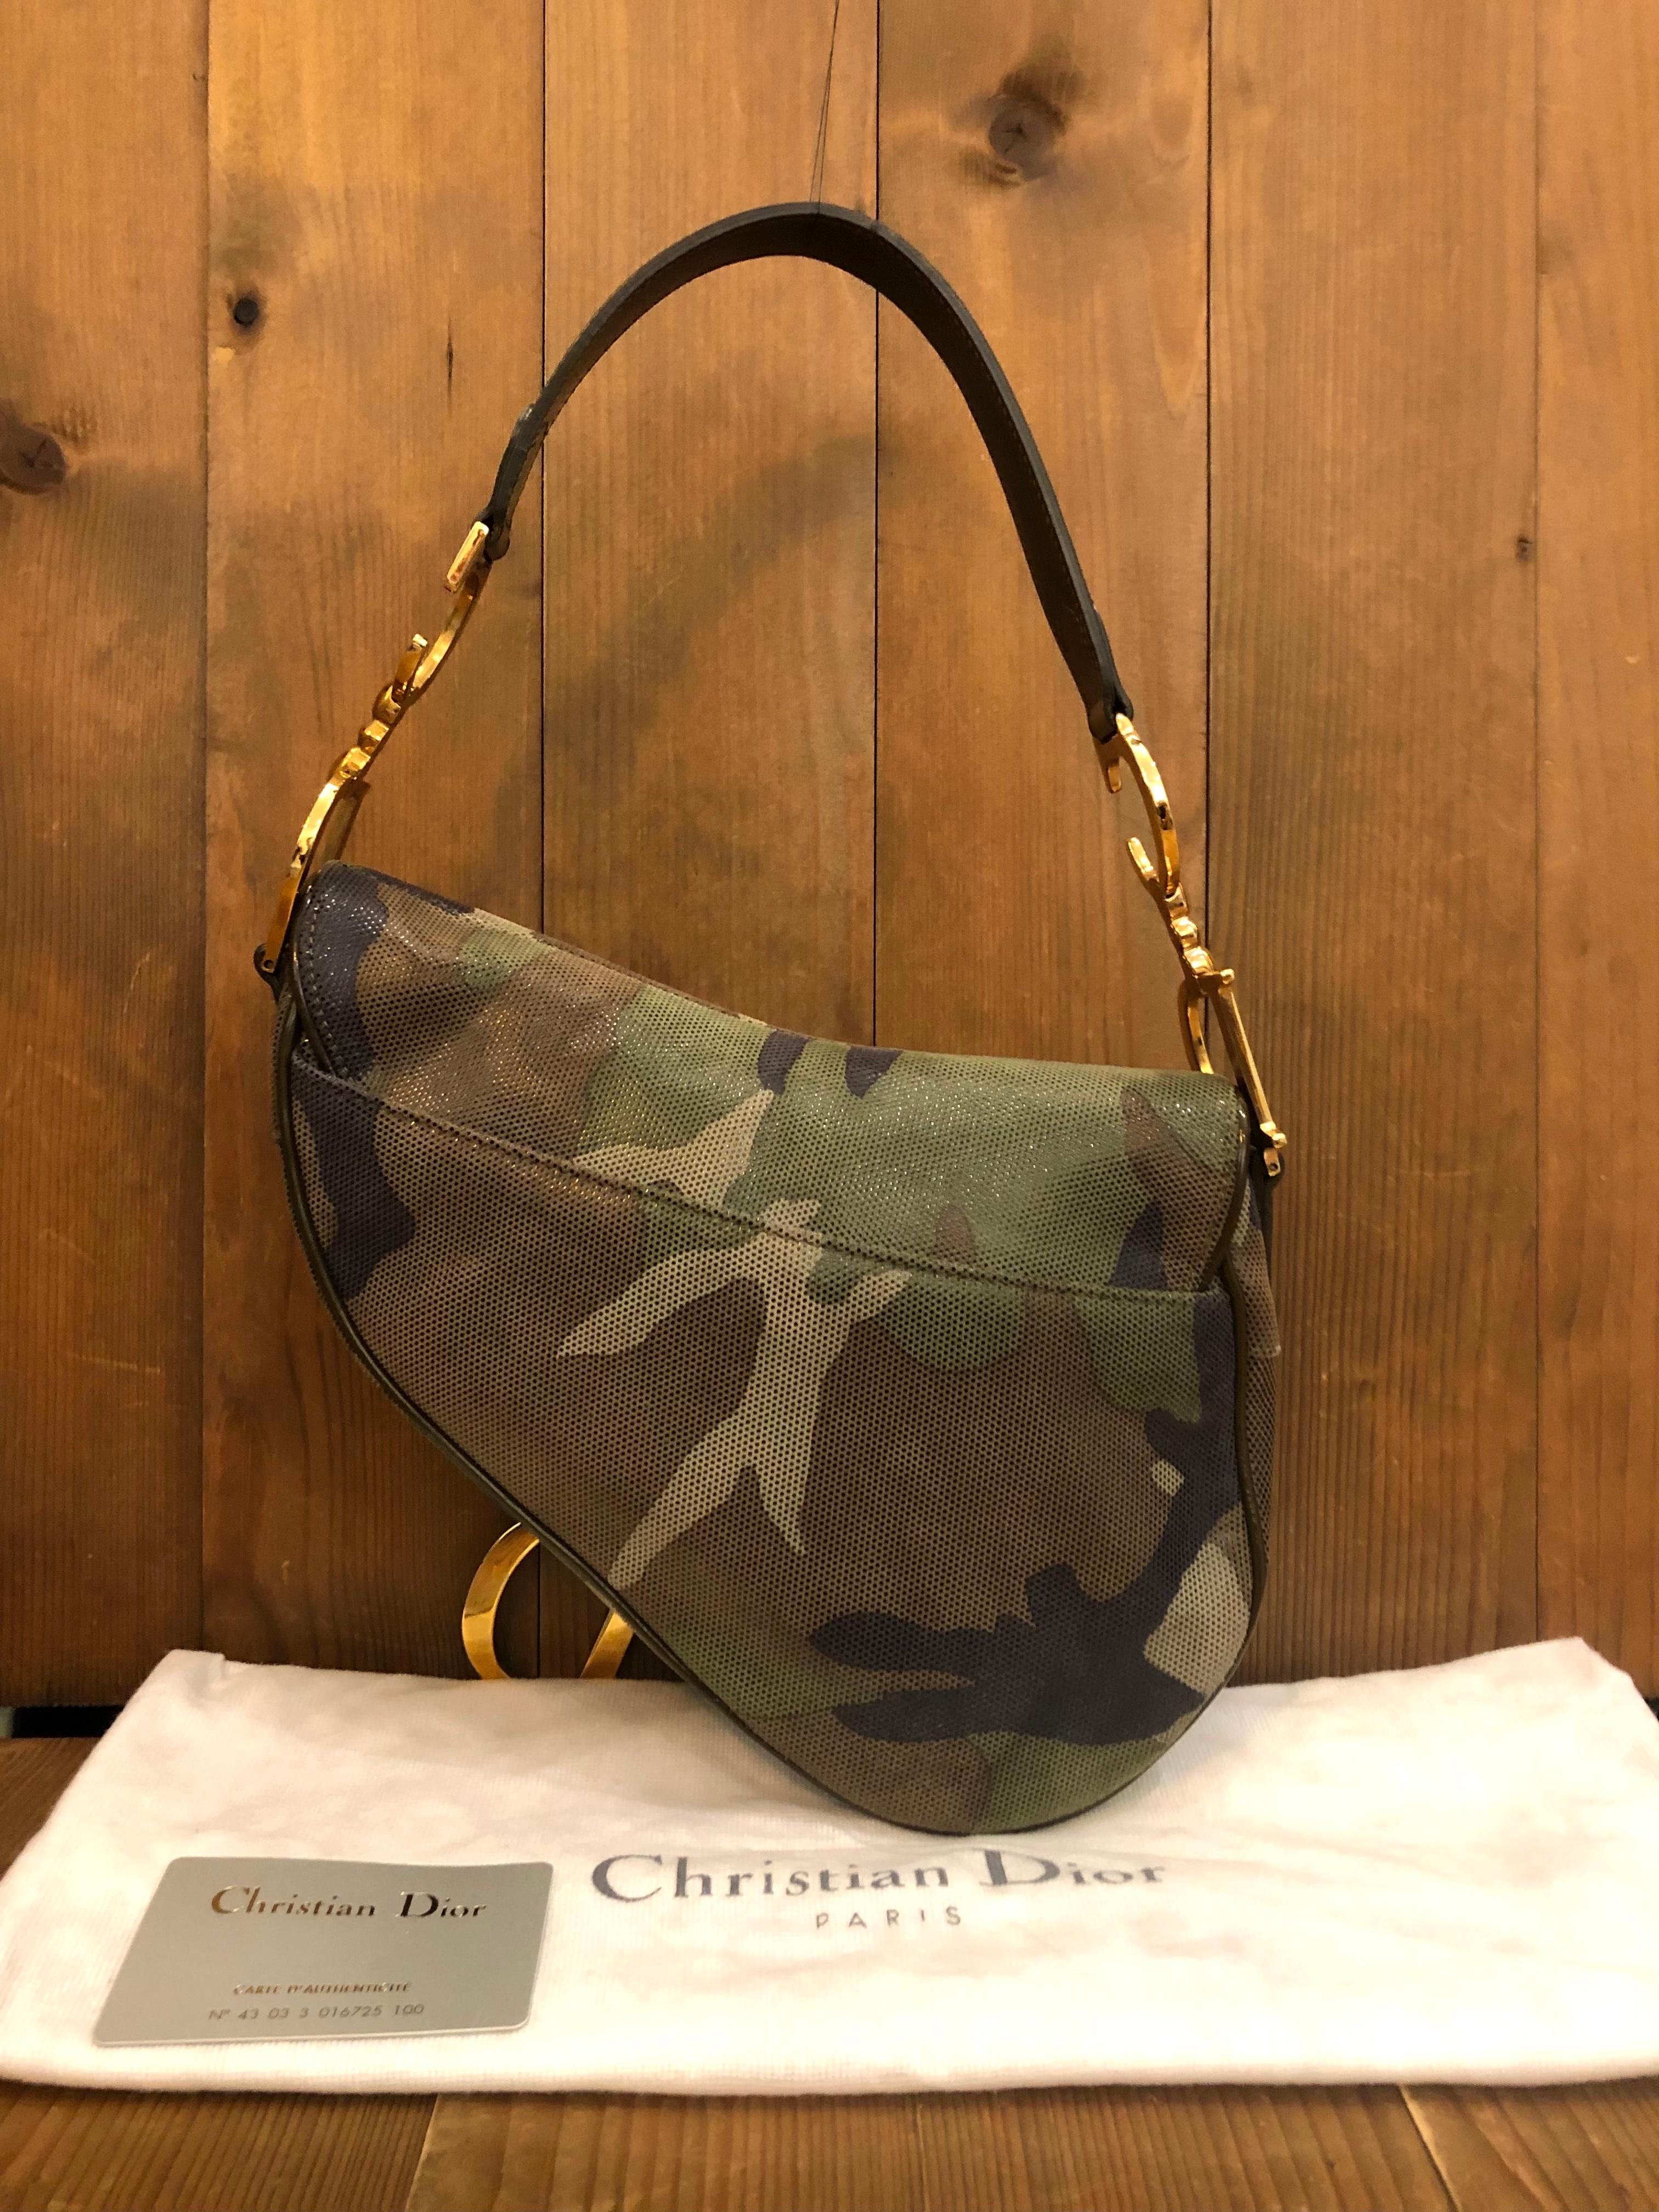 An iconic vintage Christian Dior Saddle Bag in green camouflage coated canvas from the year 2000 under the influence of John Galliano. This Dior saddle was purchased at the Dior Store at Landmark Mall in Hong Kong. Made in Italy. Measures 24 x 20.25